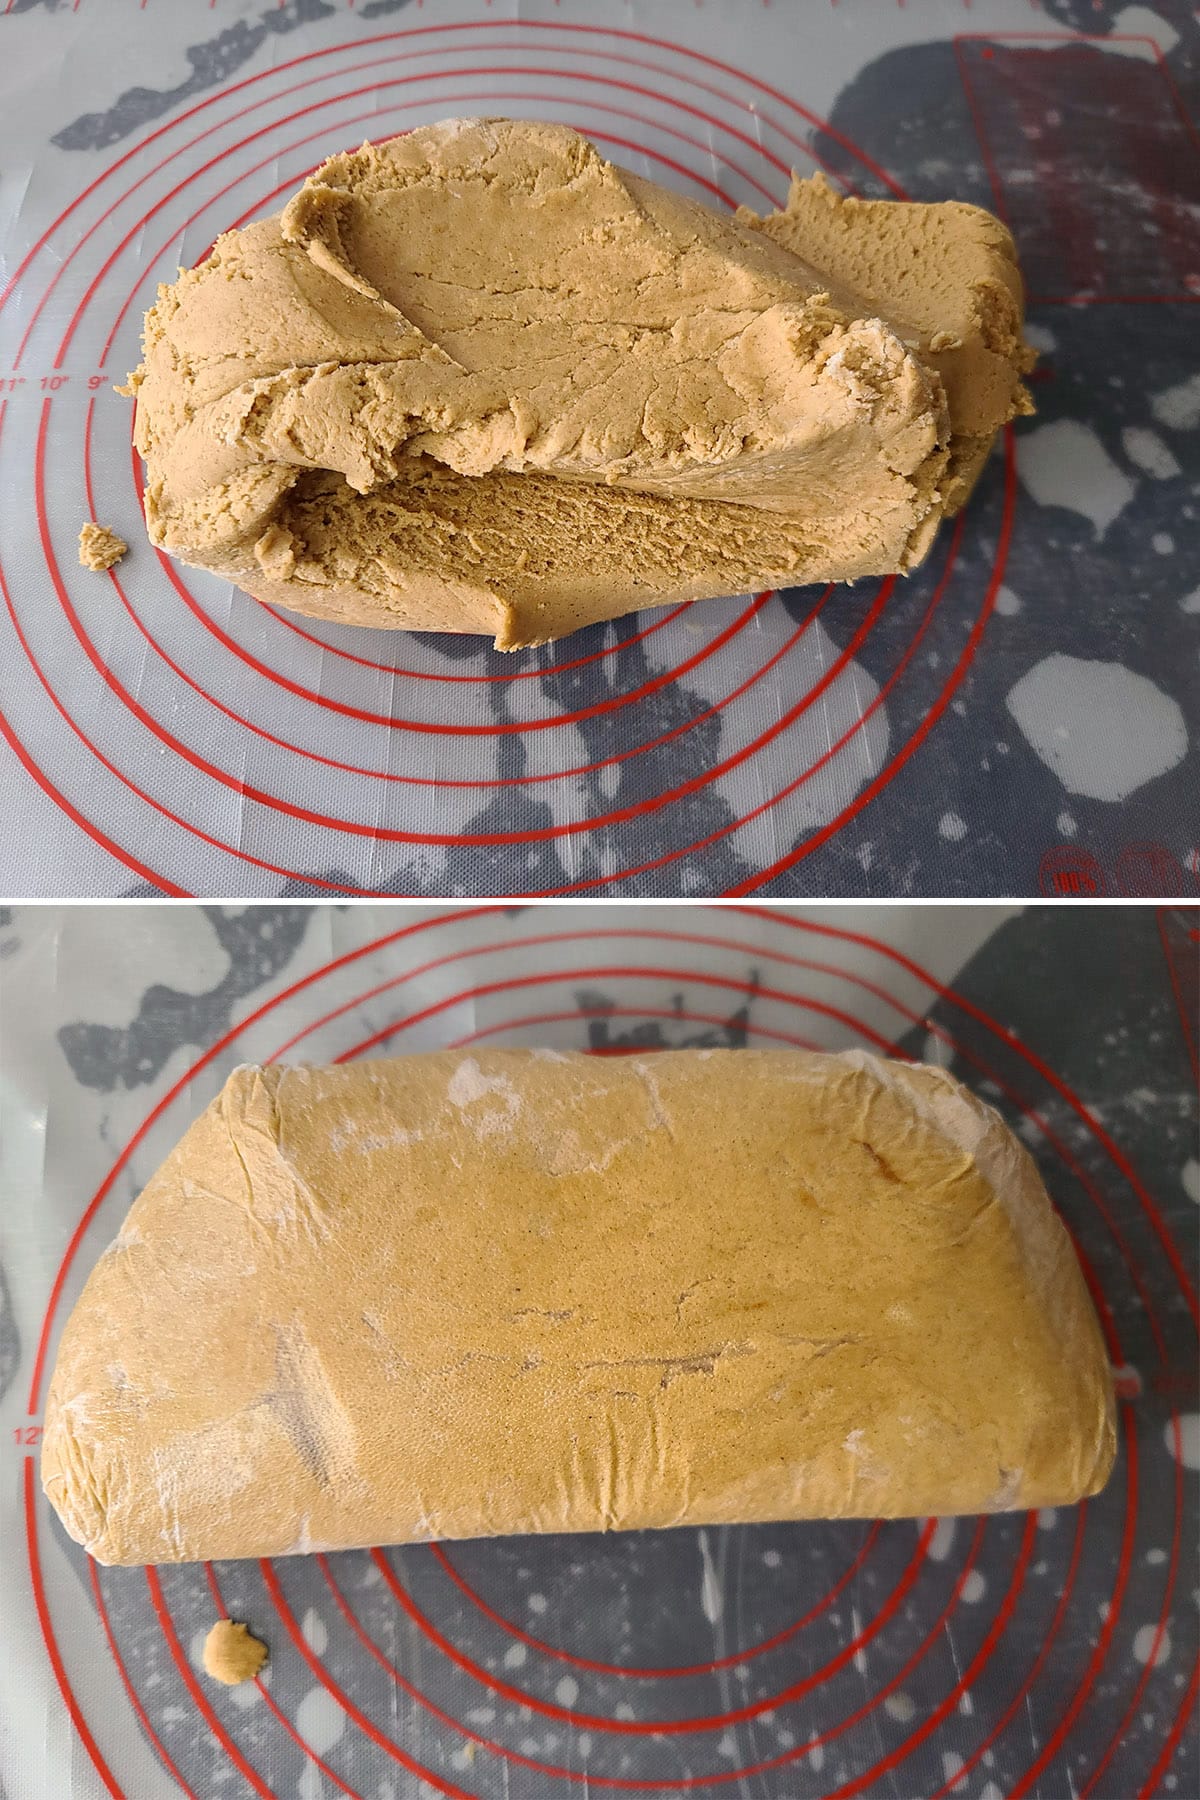 The smooth light brown dough in a ball, before and after being wrapped in plastic.